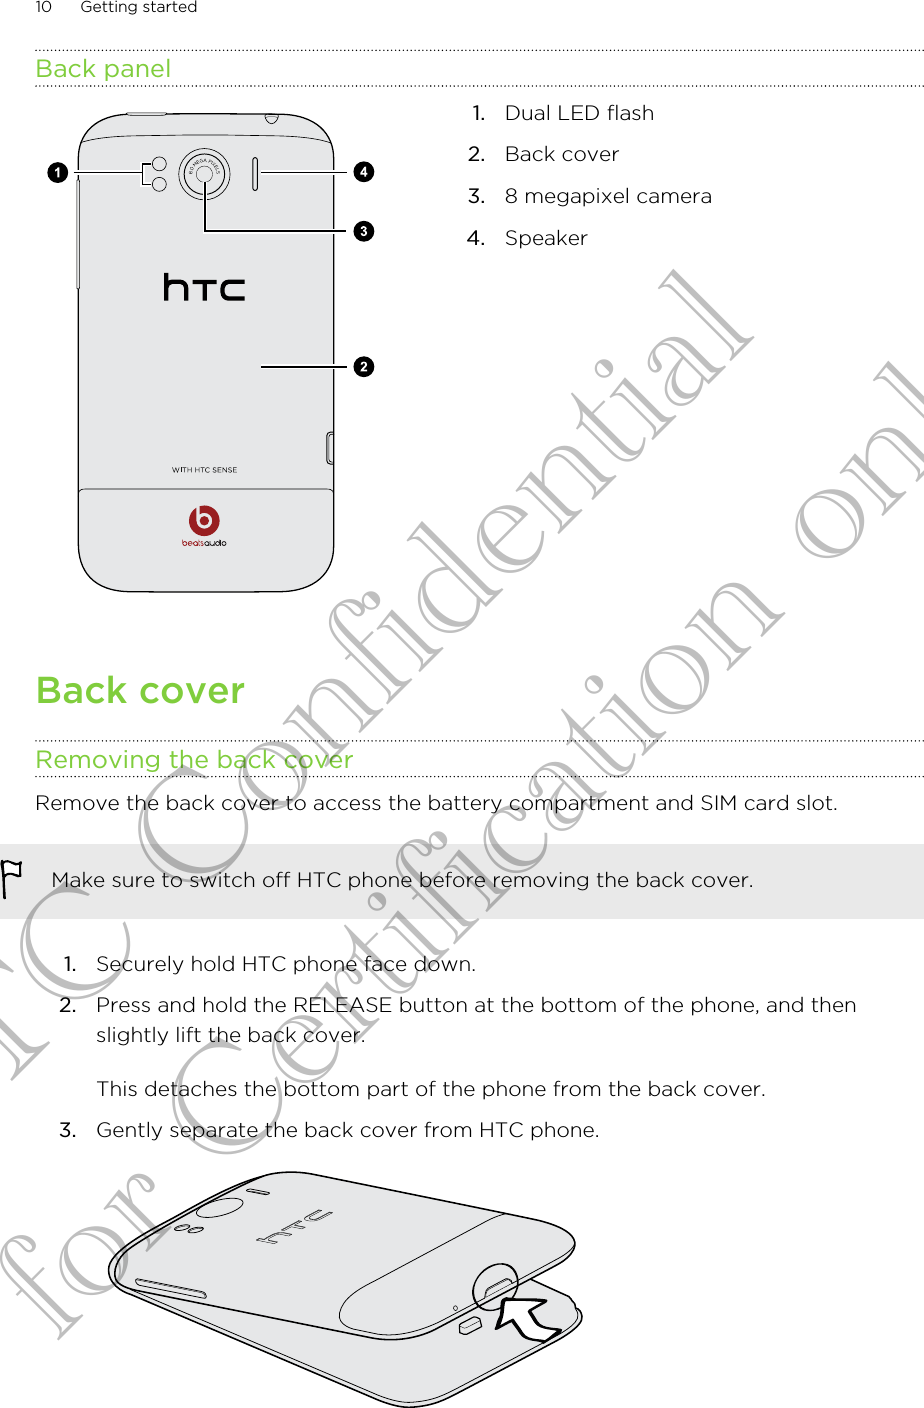 Back panel1. Dual LED flash2. Back cover3. 8 megapixel camera4. SpeakerBack coverRemoving the back coverRemove the back cover to access the battery compartment and SIM card slot.Make sure to switch off HTC phone before removing the back cover.1. Securely hold HTC phone face down.2. Press and hold the RELEASE button at the bottom of the phone, and thenslightly lift the back cover. This detaches the bottom part of the phone from the back cover.3. Gently separate the back cover from HTC phone. 10 Getting startedHTC Confidential for Certification only